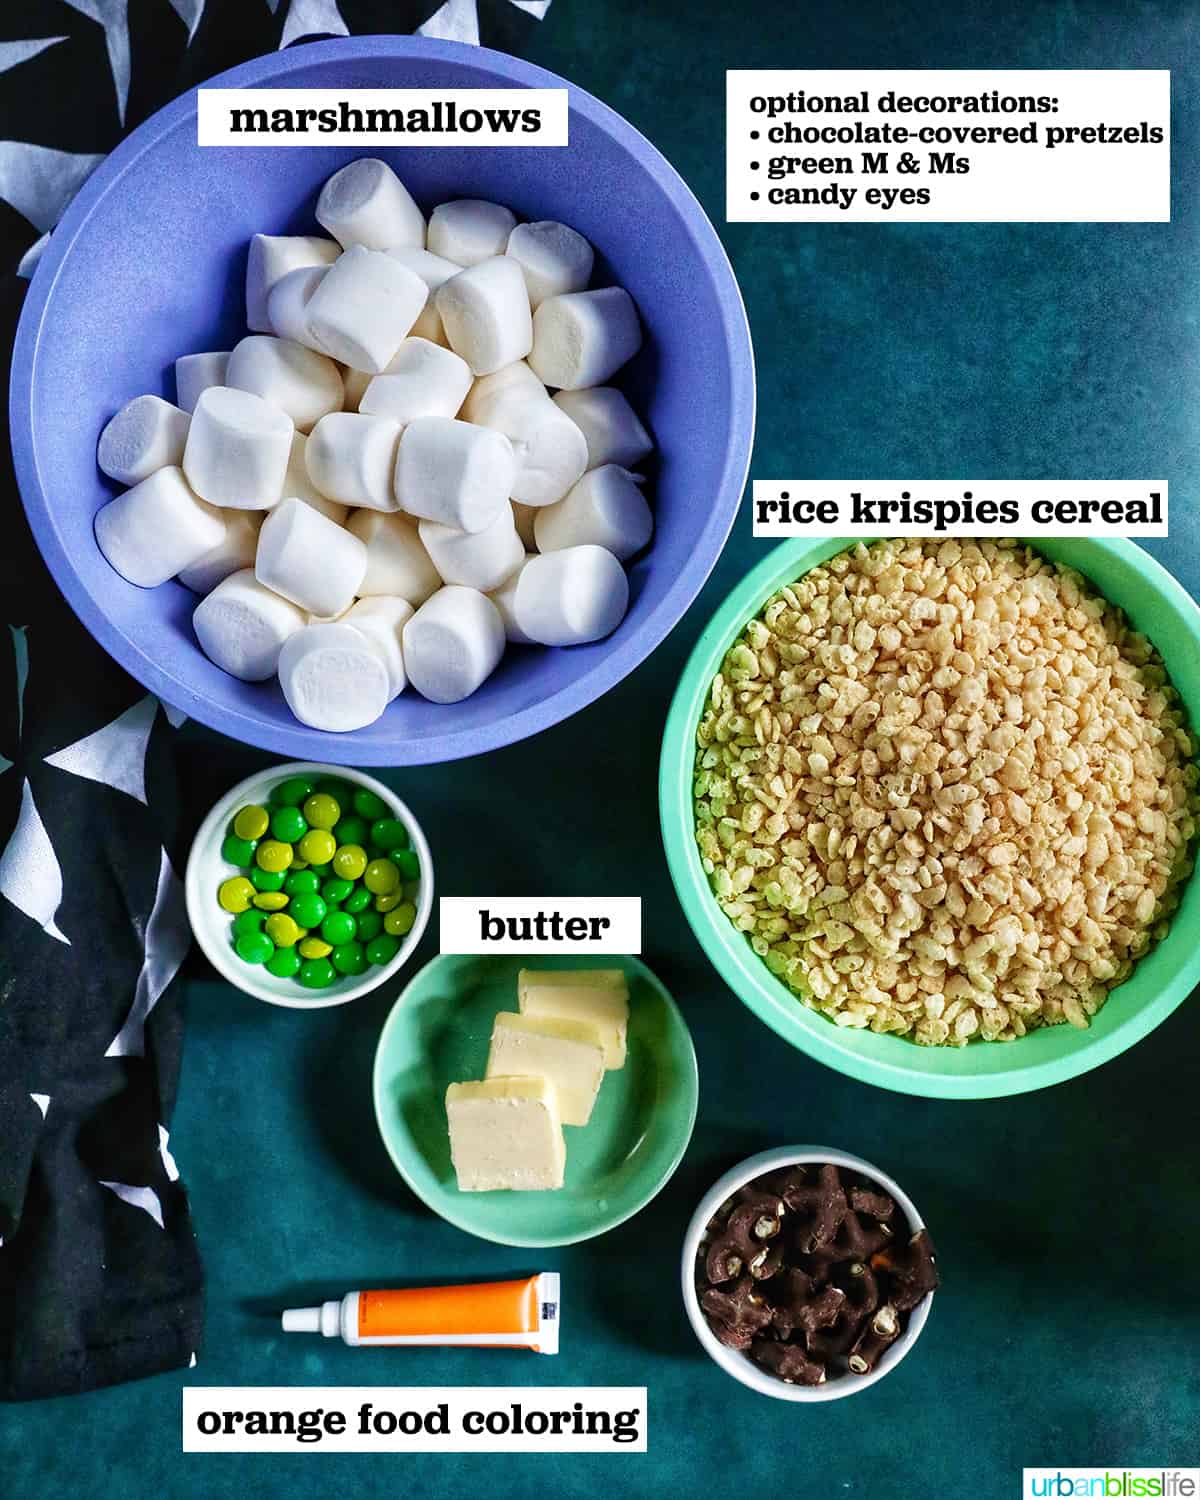 marshmallows, rice krispies cereal, and decorations to make pumpkin rice krispie treats.